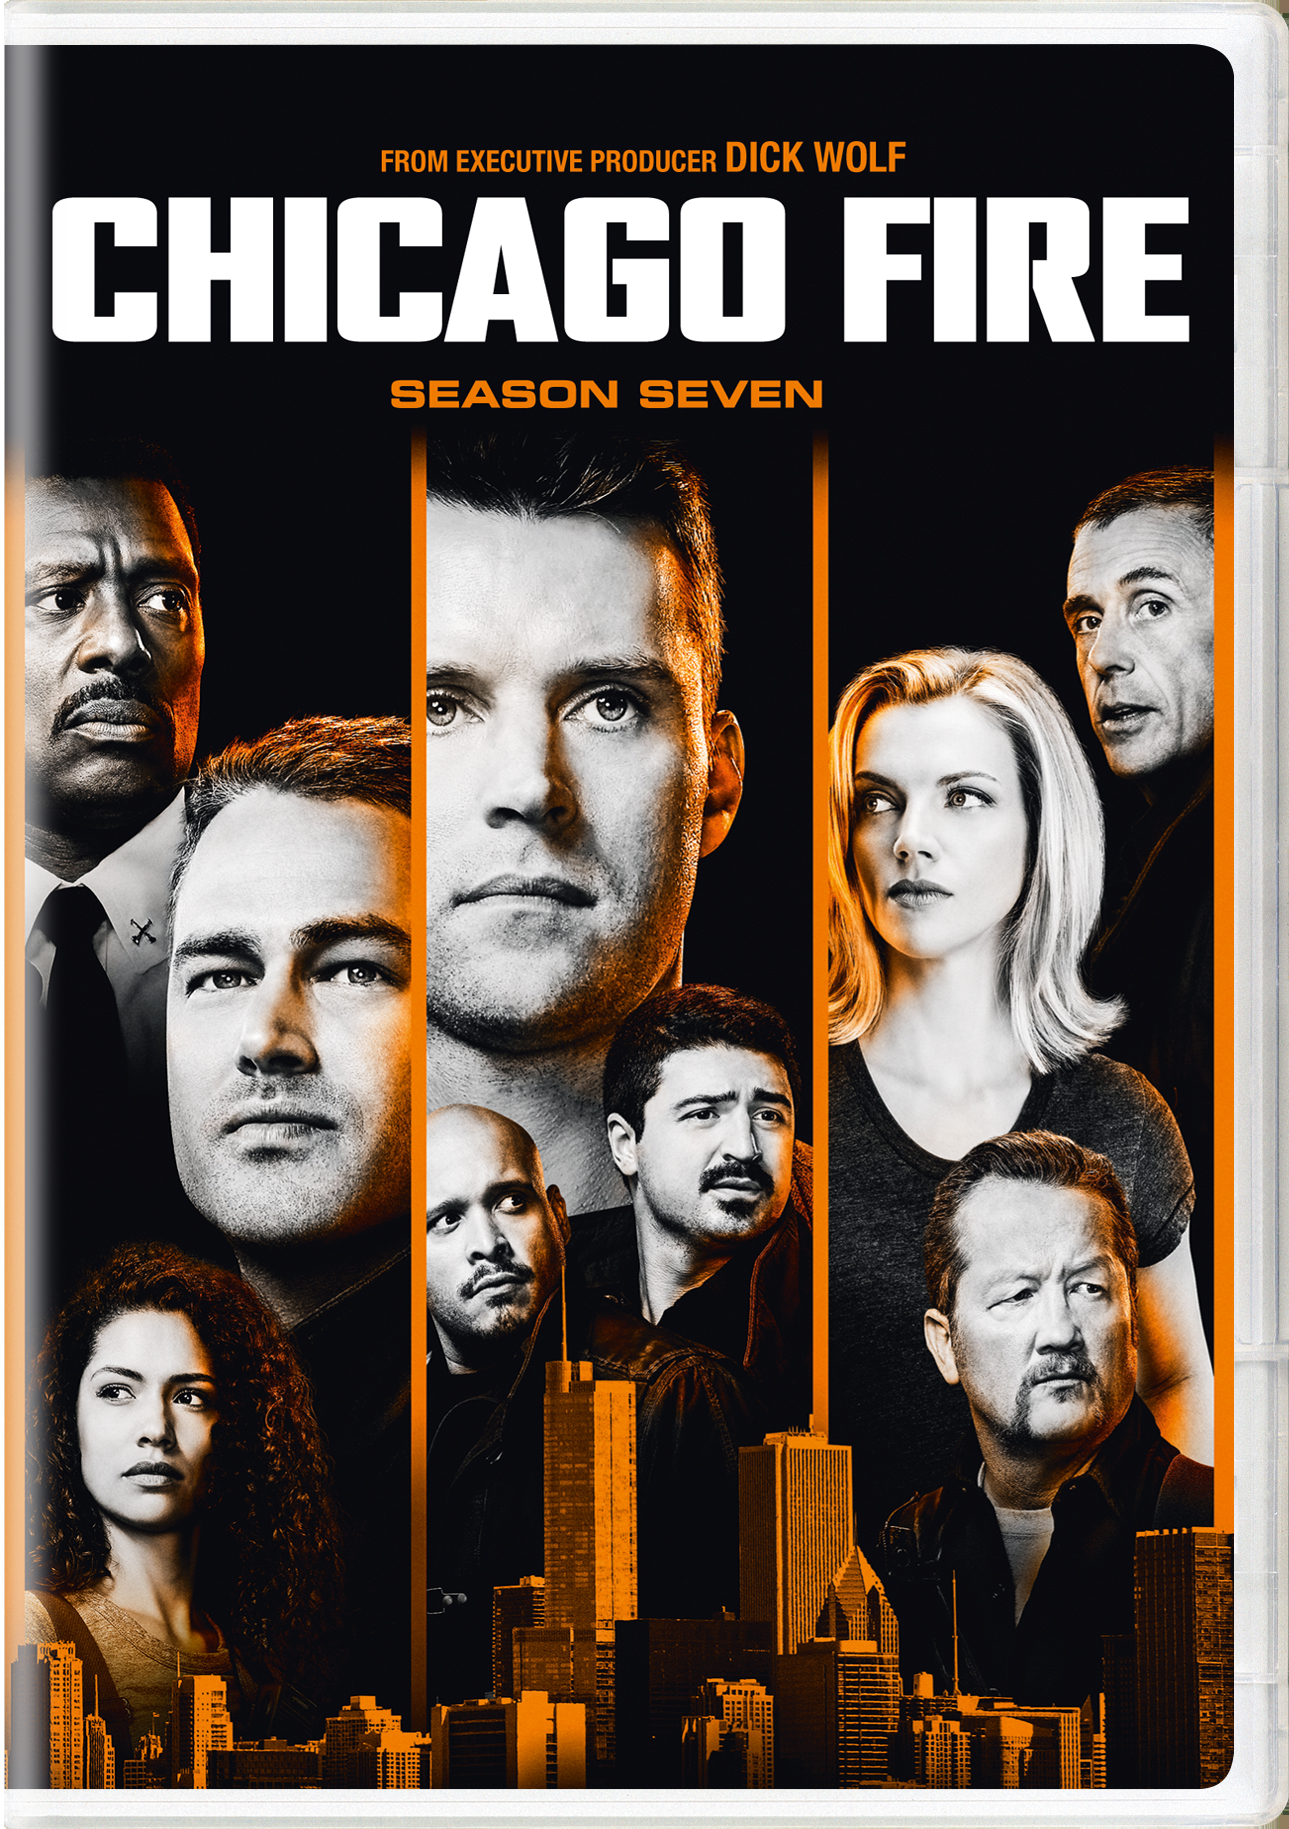 Chicago Fire: Season Seven - DVD   - Drama Television On DVD - TV Shows On GRUV